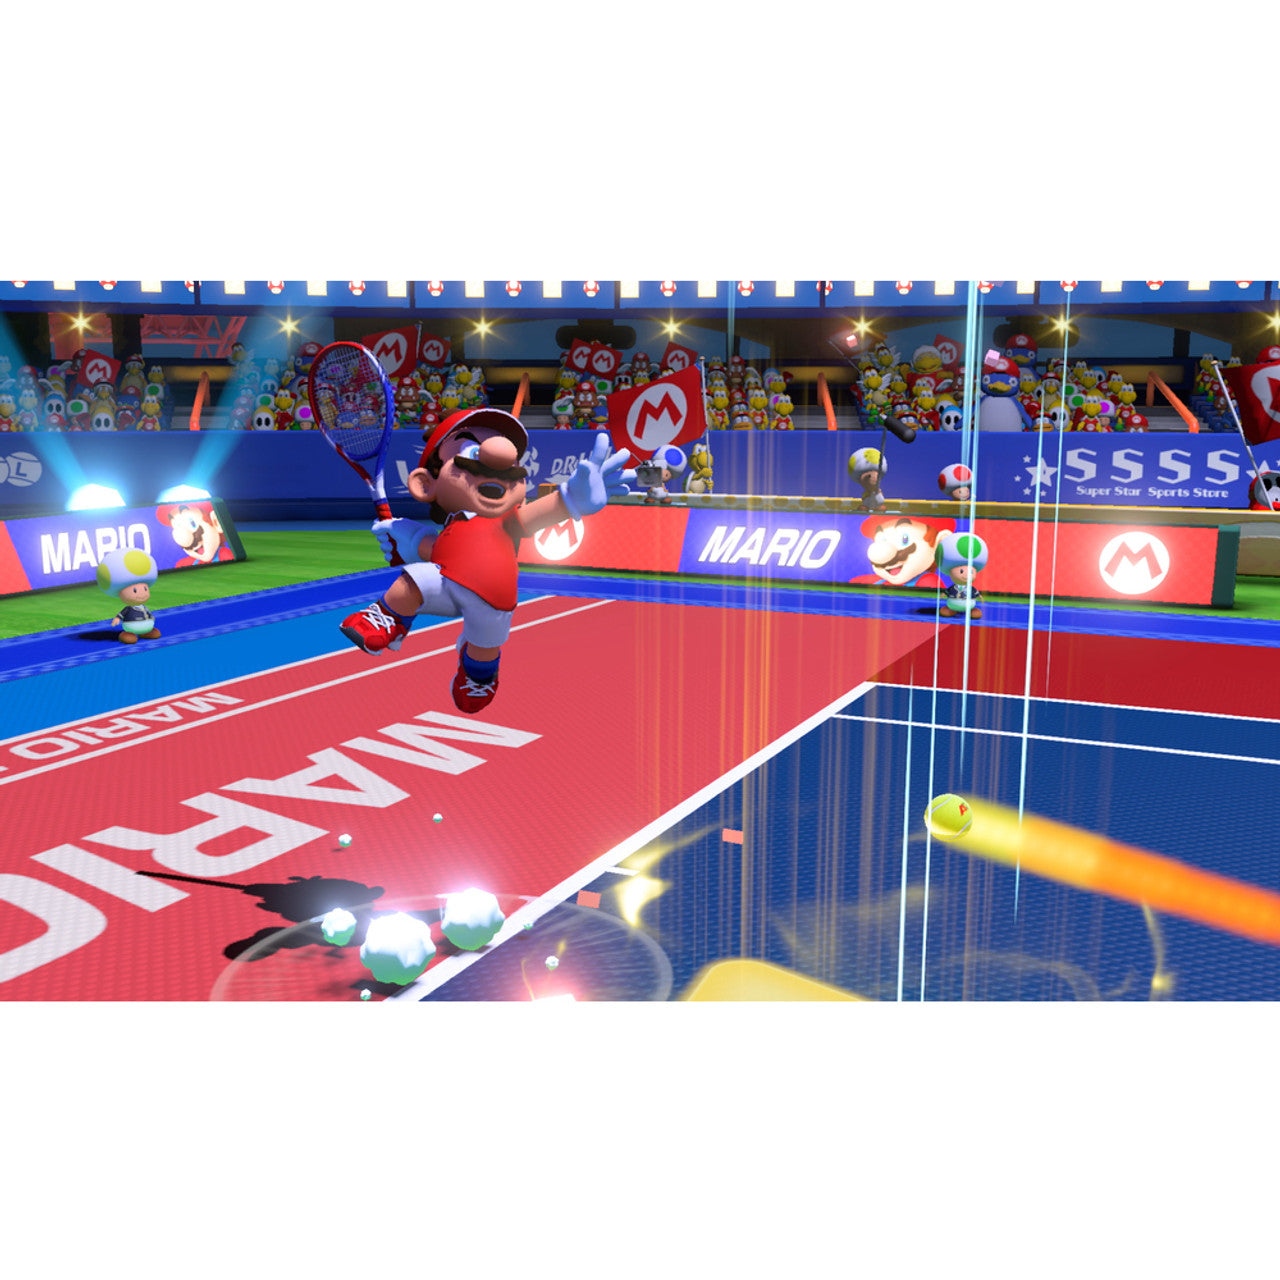 Product Image : This is brand new.<br>Unleash an arsenal of shots and strategies in all-out tennis battles with friends, family, and fan-favorite Mushroom Kingdom characters. Whether you play locally,* online,** or using simple motion controls, intense rallies await! In story mode, experience a new favor of tennis gameplay, with a variety of missions, boss battles and more.

Complete missions and boss battles in story mode while mastering the controls. Test your hard-earned skills in singles or doubles with